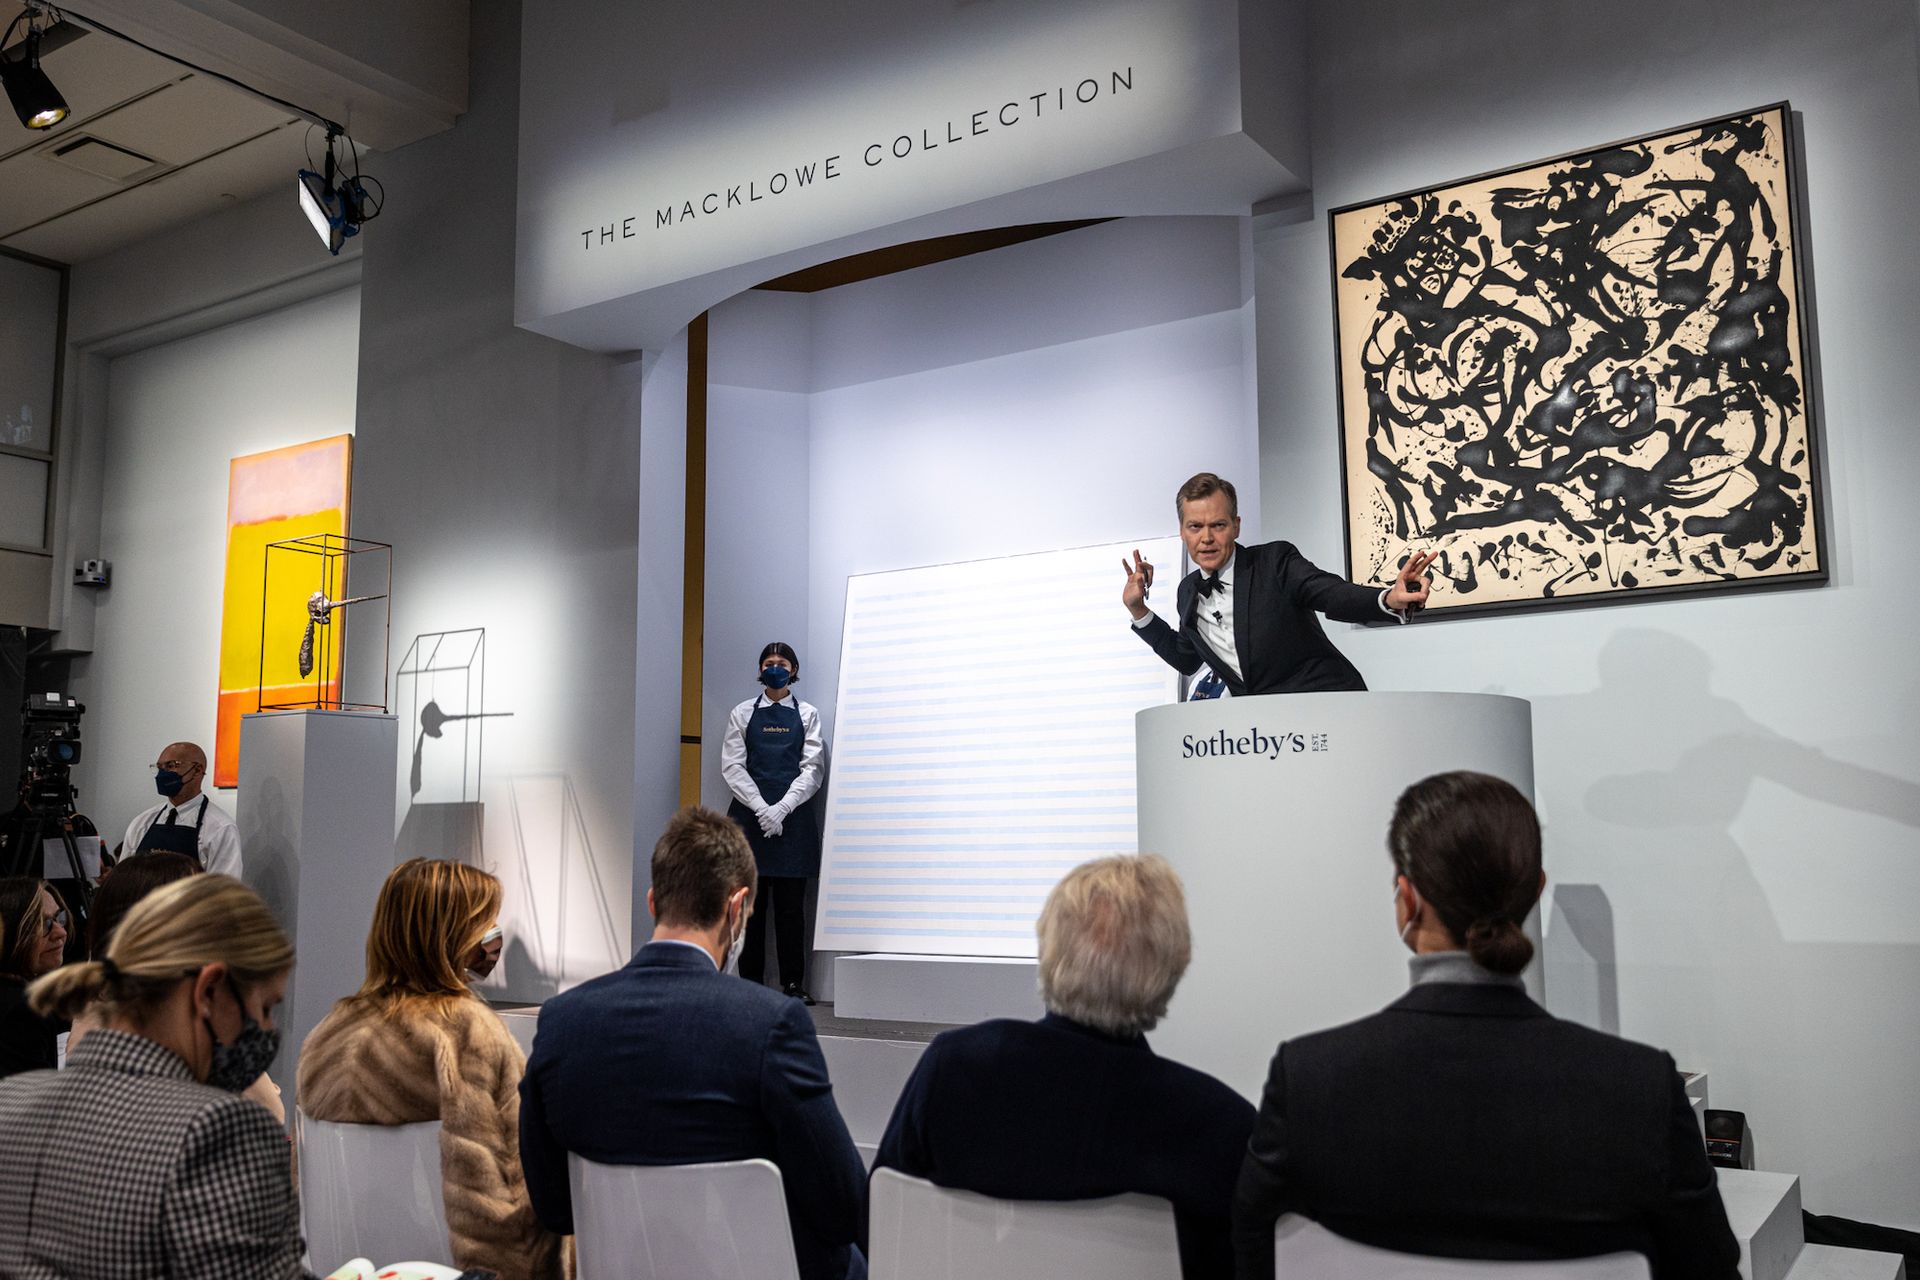 Auctioneer Oliver Barker conducts Sotheby’s first sale of the Macklowe collection in New York on 15 November 2021. Photo courtesy Sotheby’s